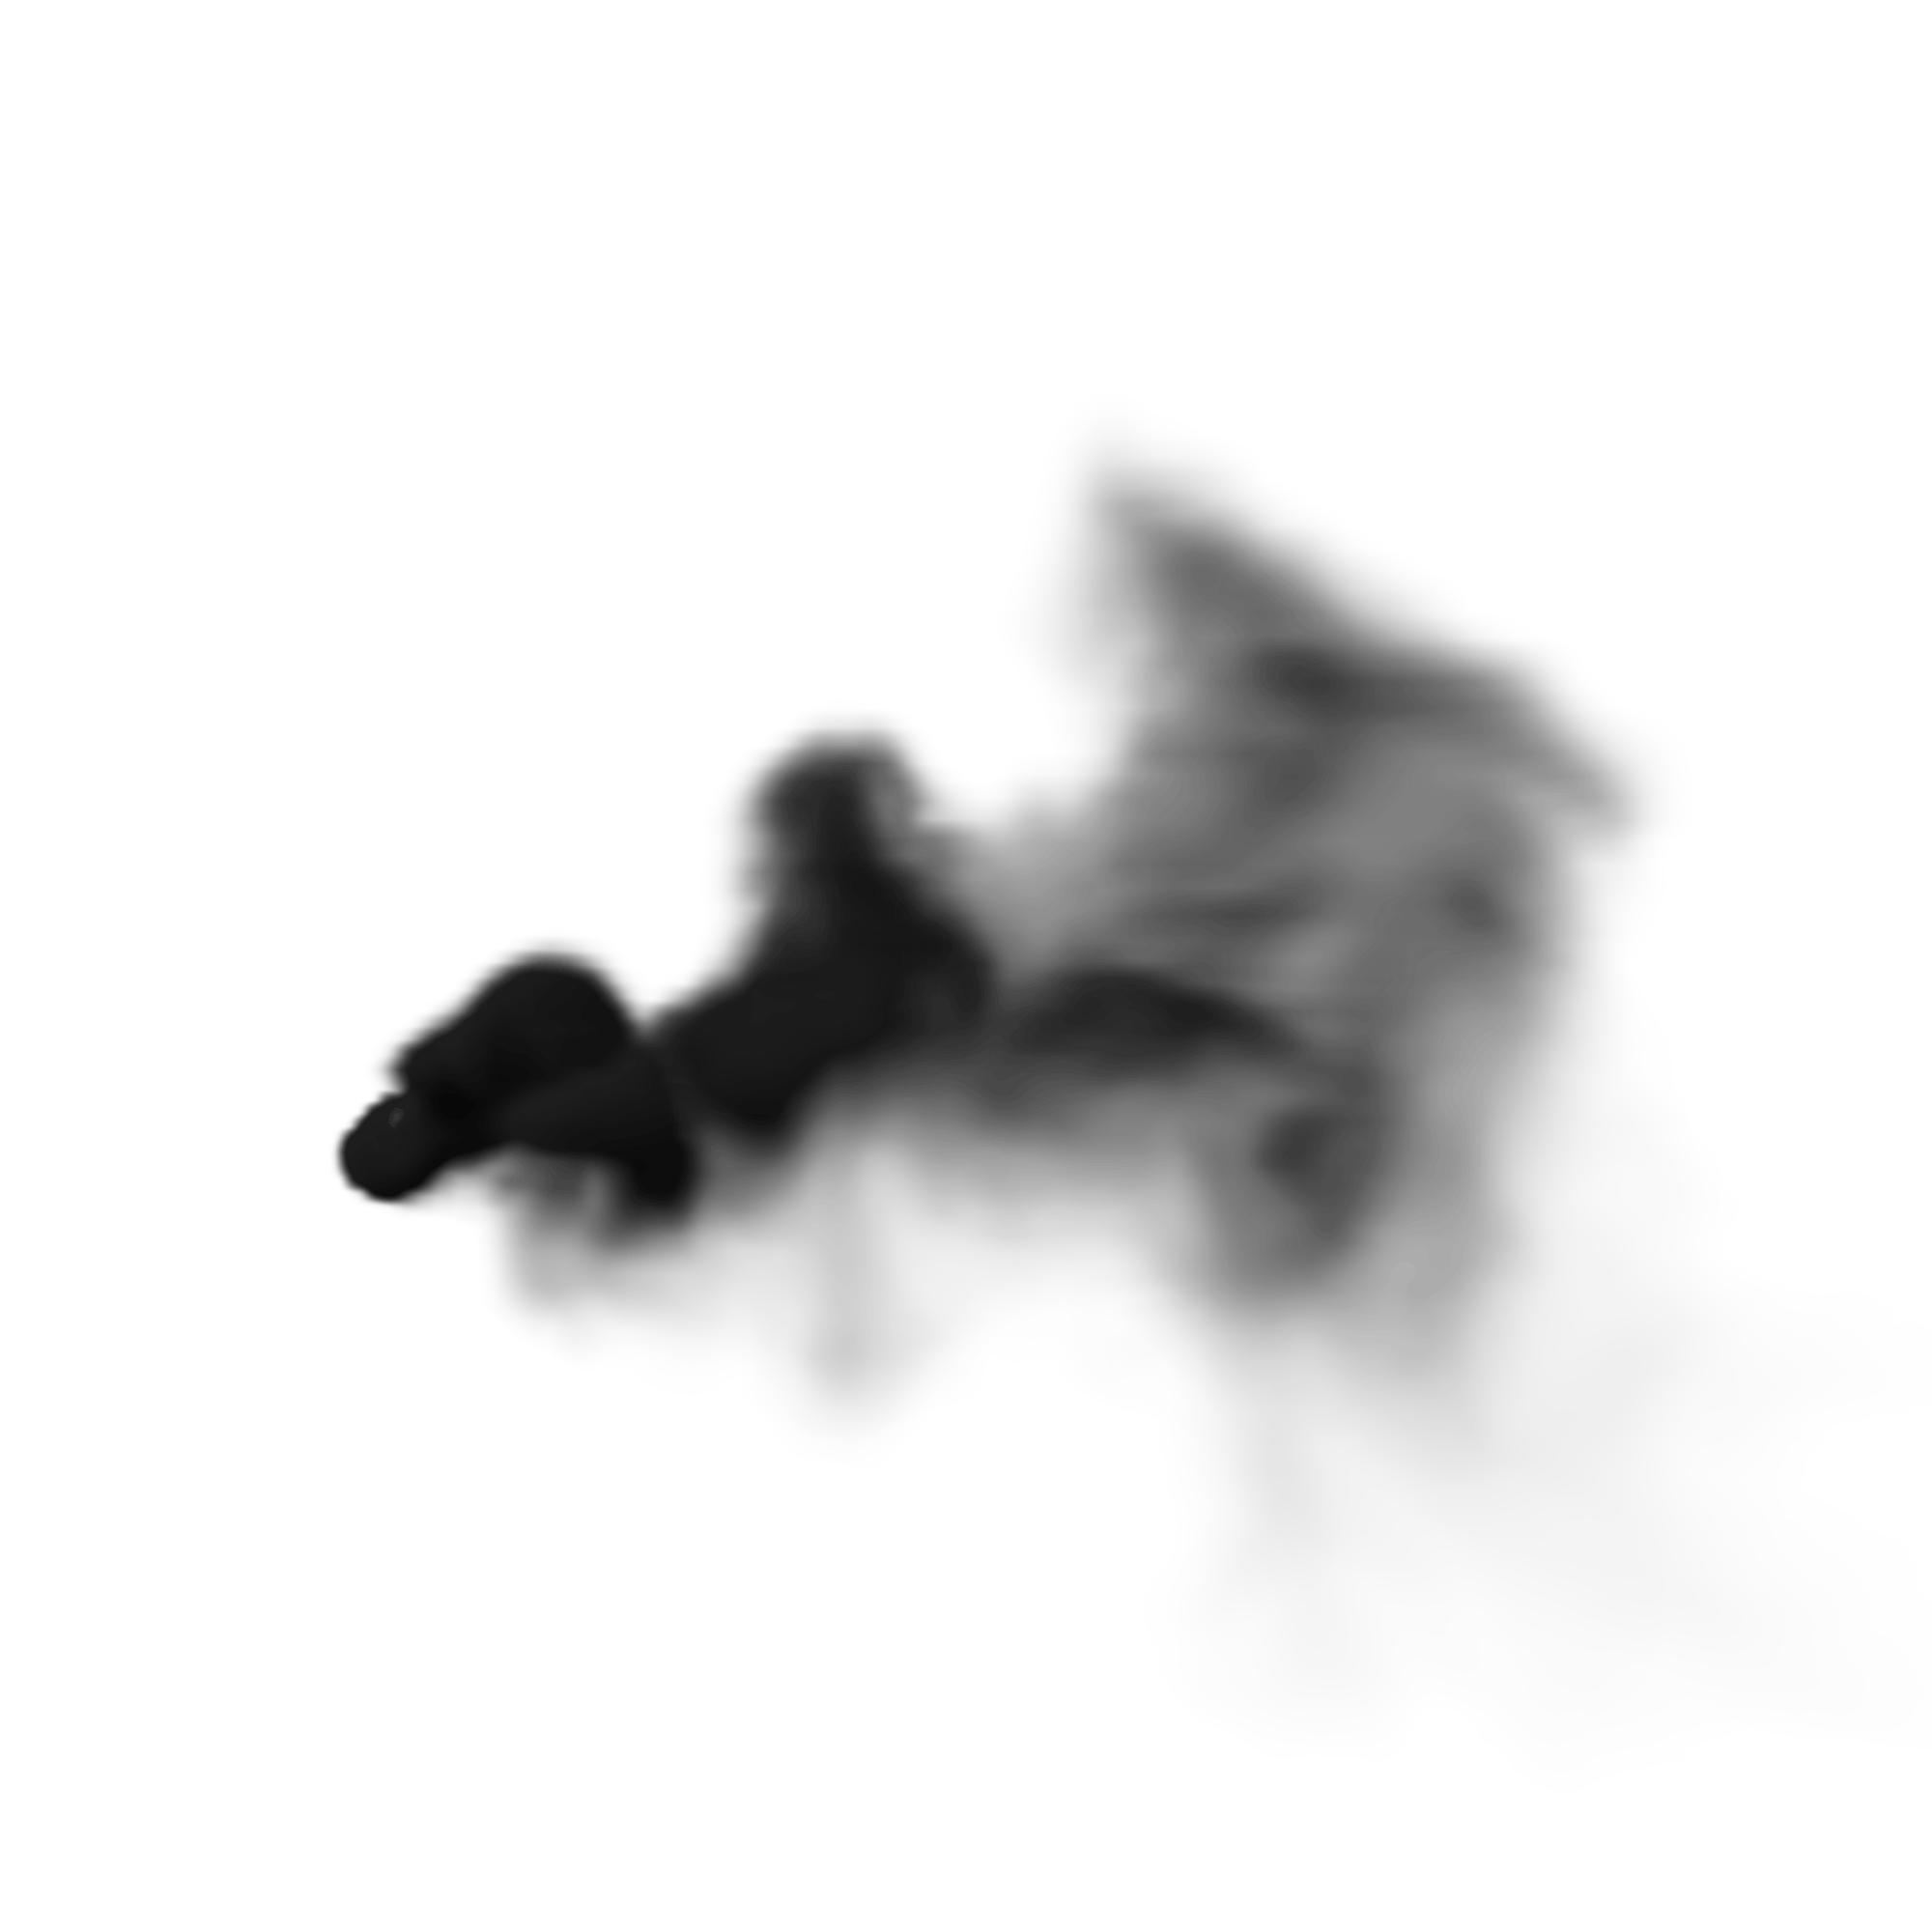 Smoke Png by Moonglowlilly Pl